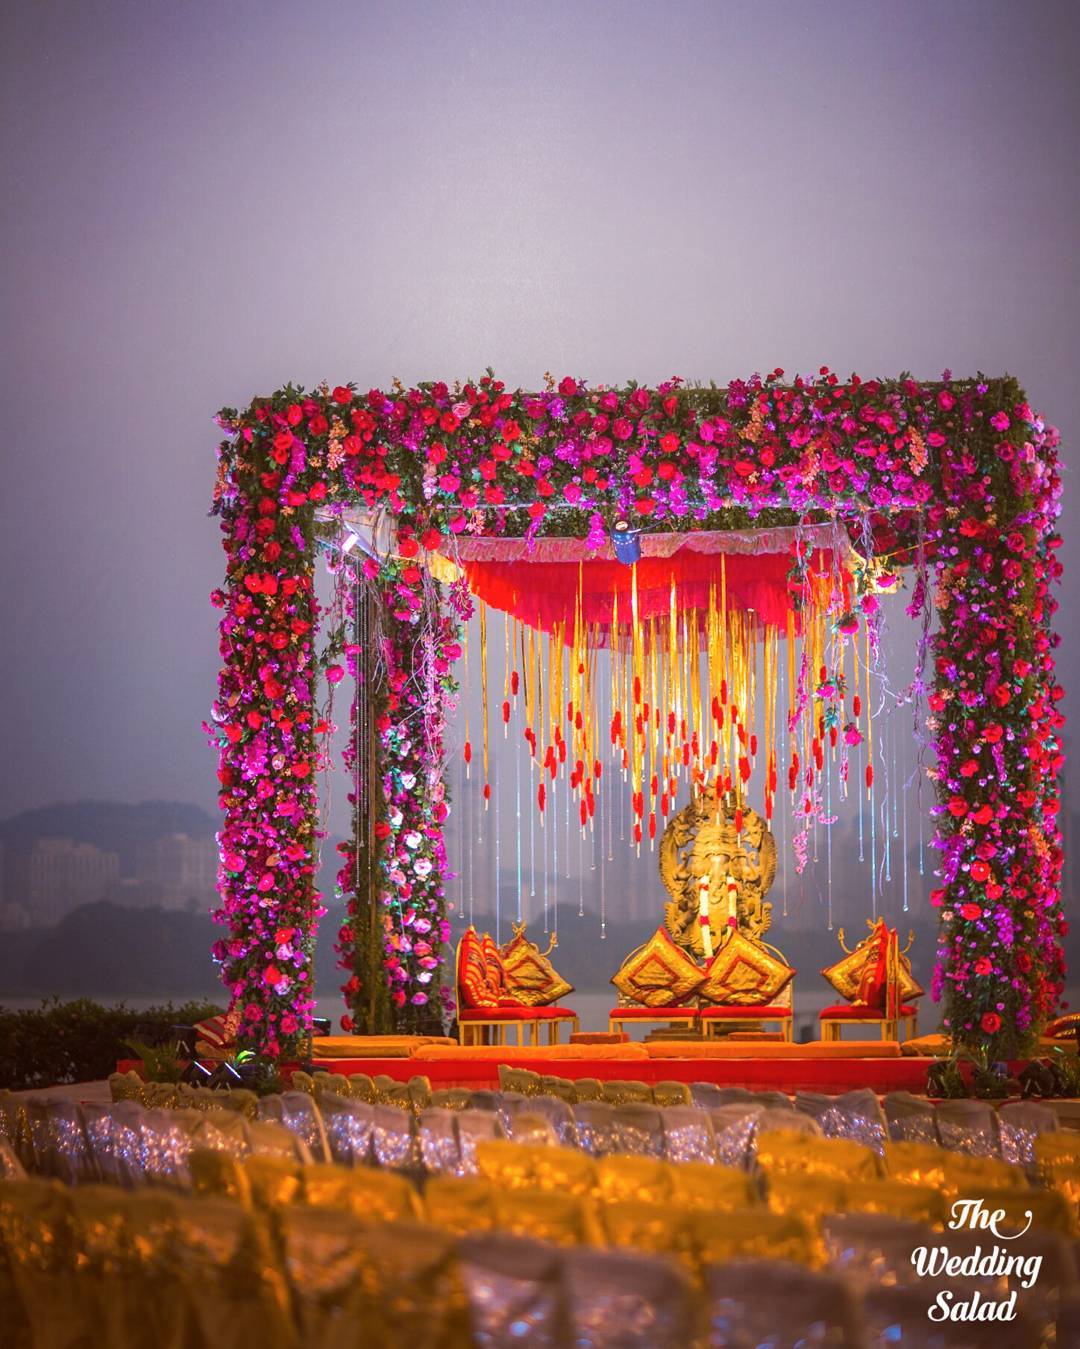 TOP 15 Flower Wedding Stage Decoration Ideas You Need To Check Right NOW